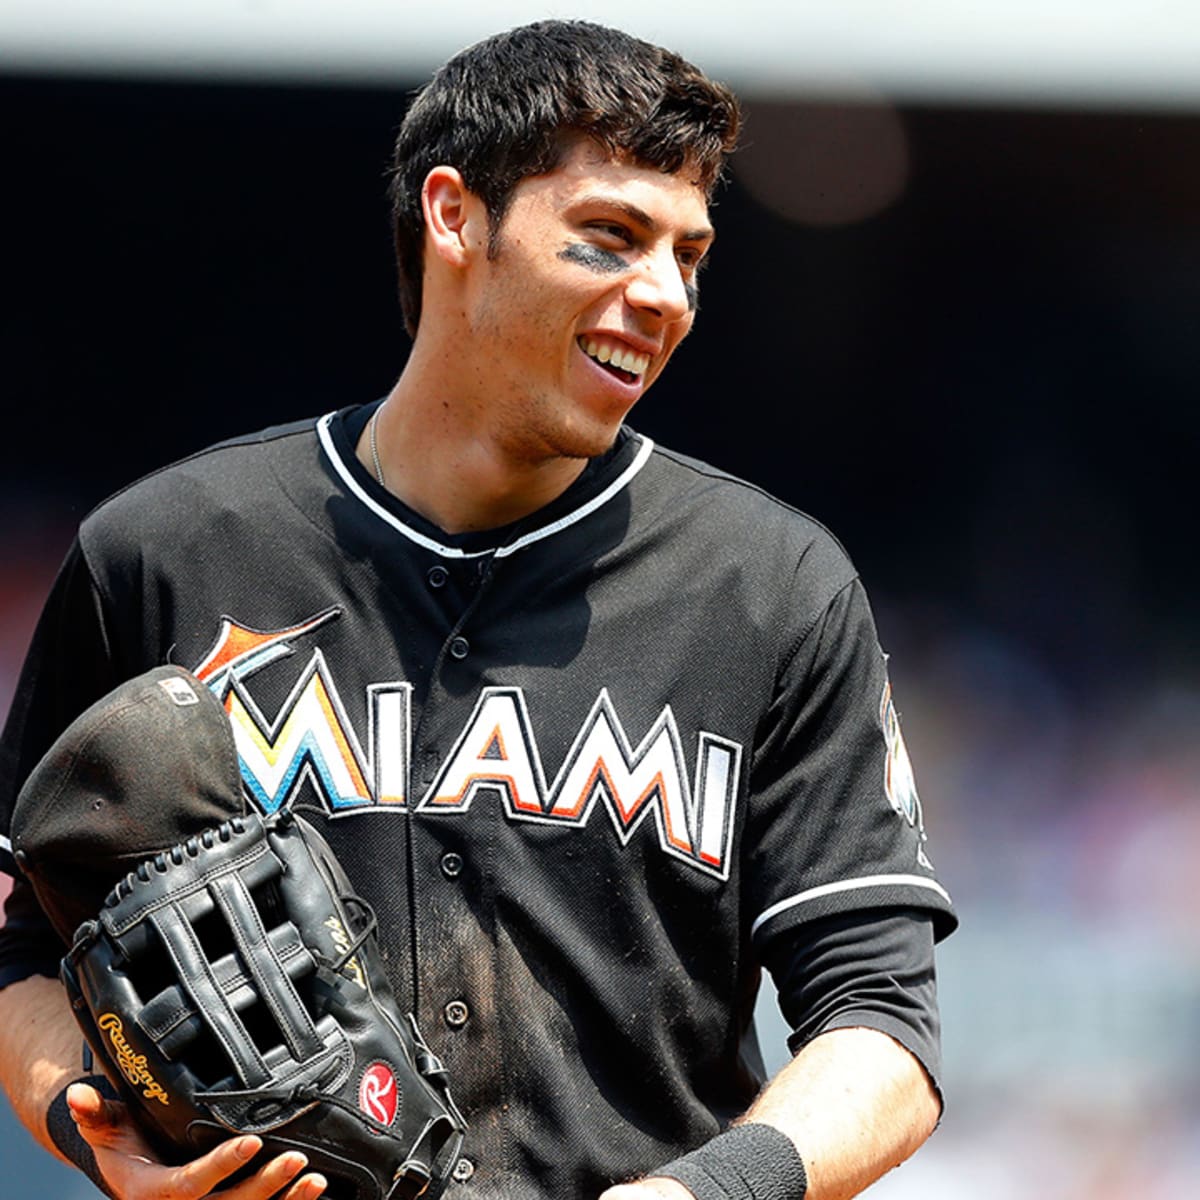 Marlins surprise Christian Yelich with lookalike from 'SNL' – Sun Sentinel